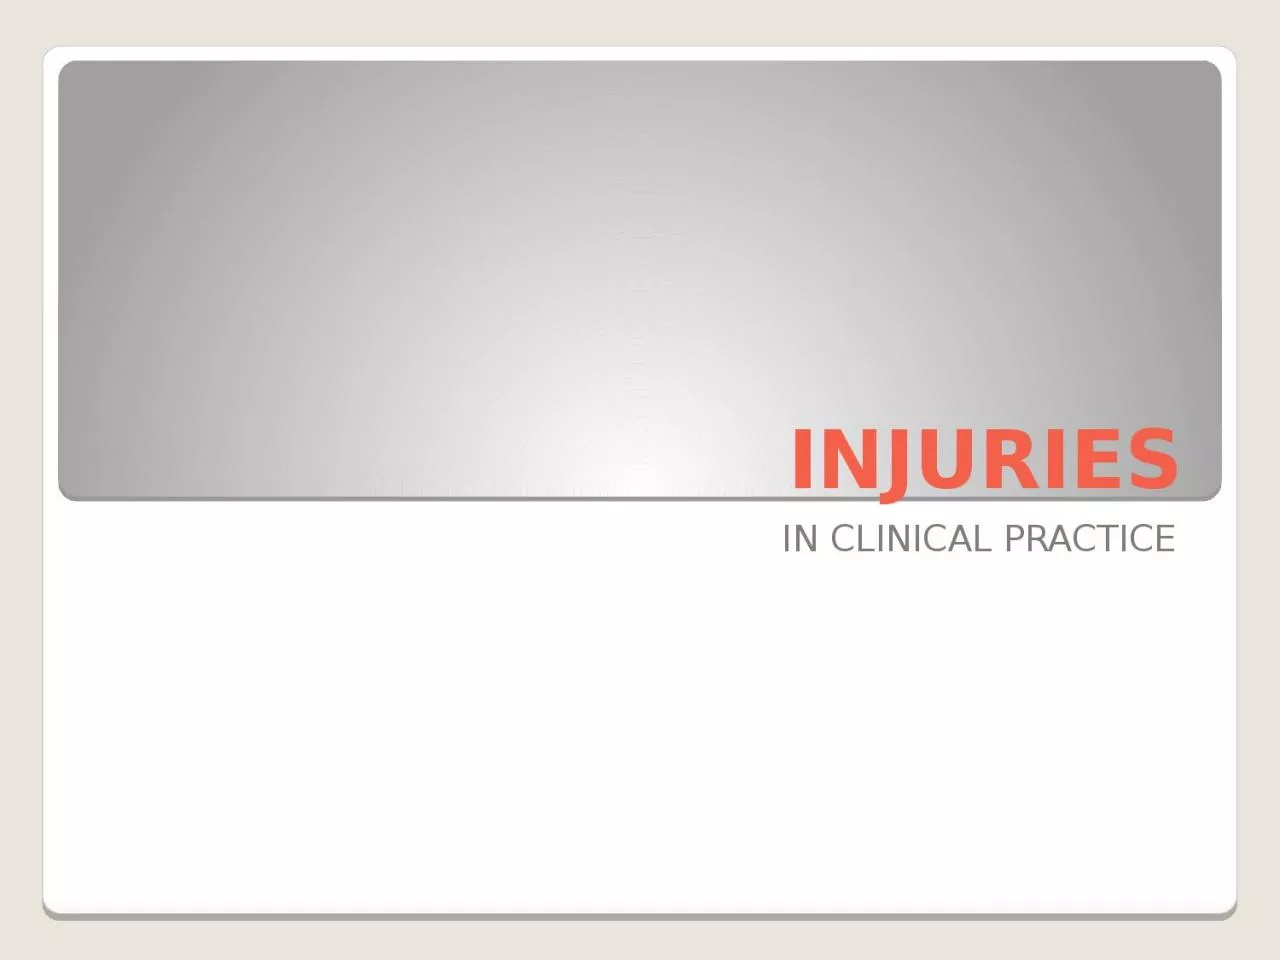 INJURIES IN CLINICAL PRACTICE